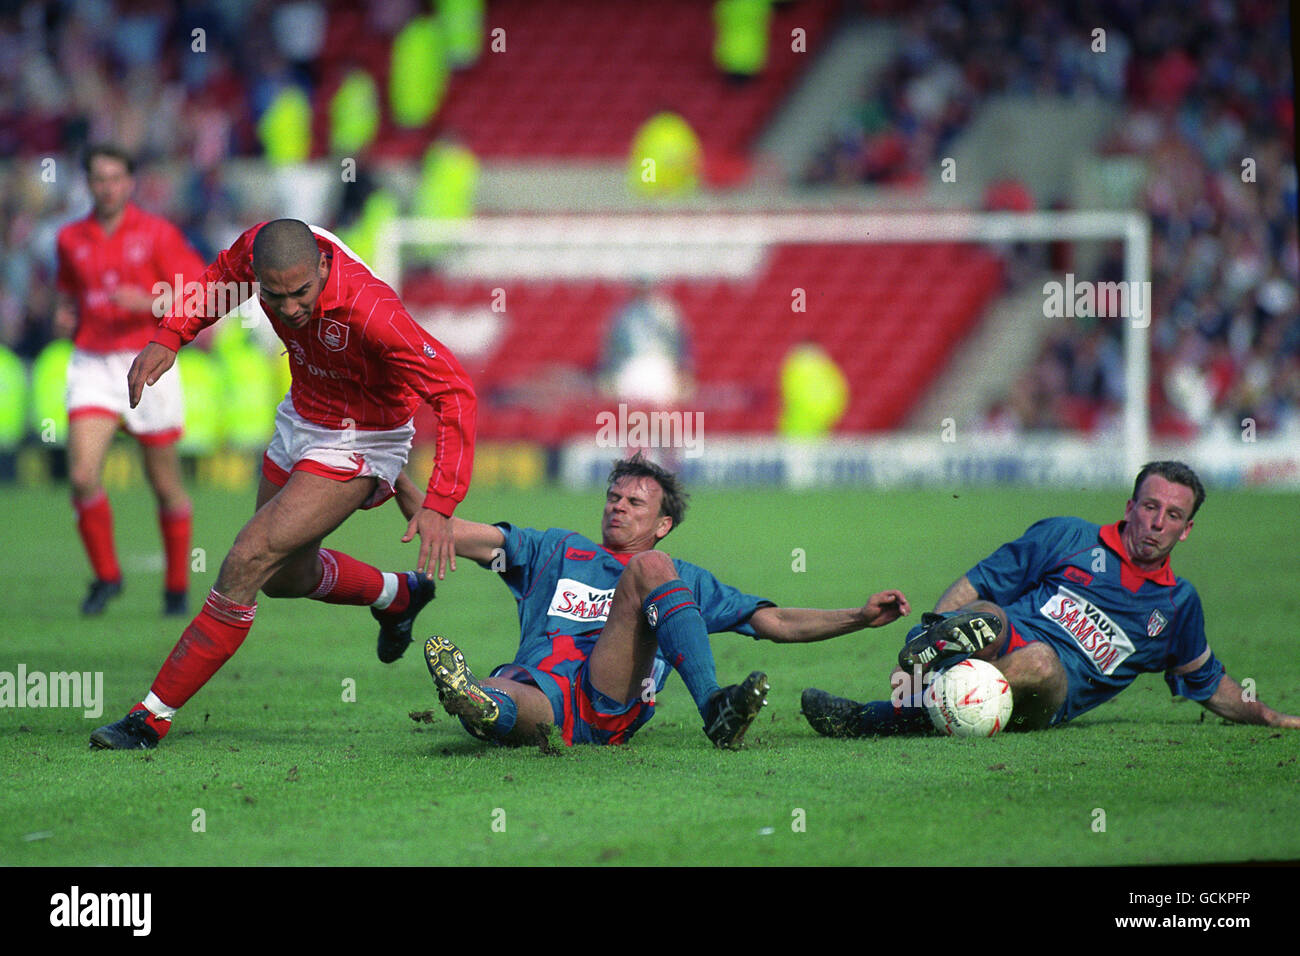 Soccer - Endsleigh League Division One - Nottingham Forest v Sunderland - City Ground. Nottingham Forest striker Stan Collymore is stopped by sunderland defenders Dariusz Kubicki (l) and Kevin Ball. Stock Photo